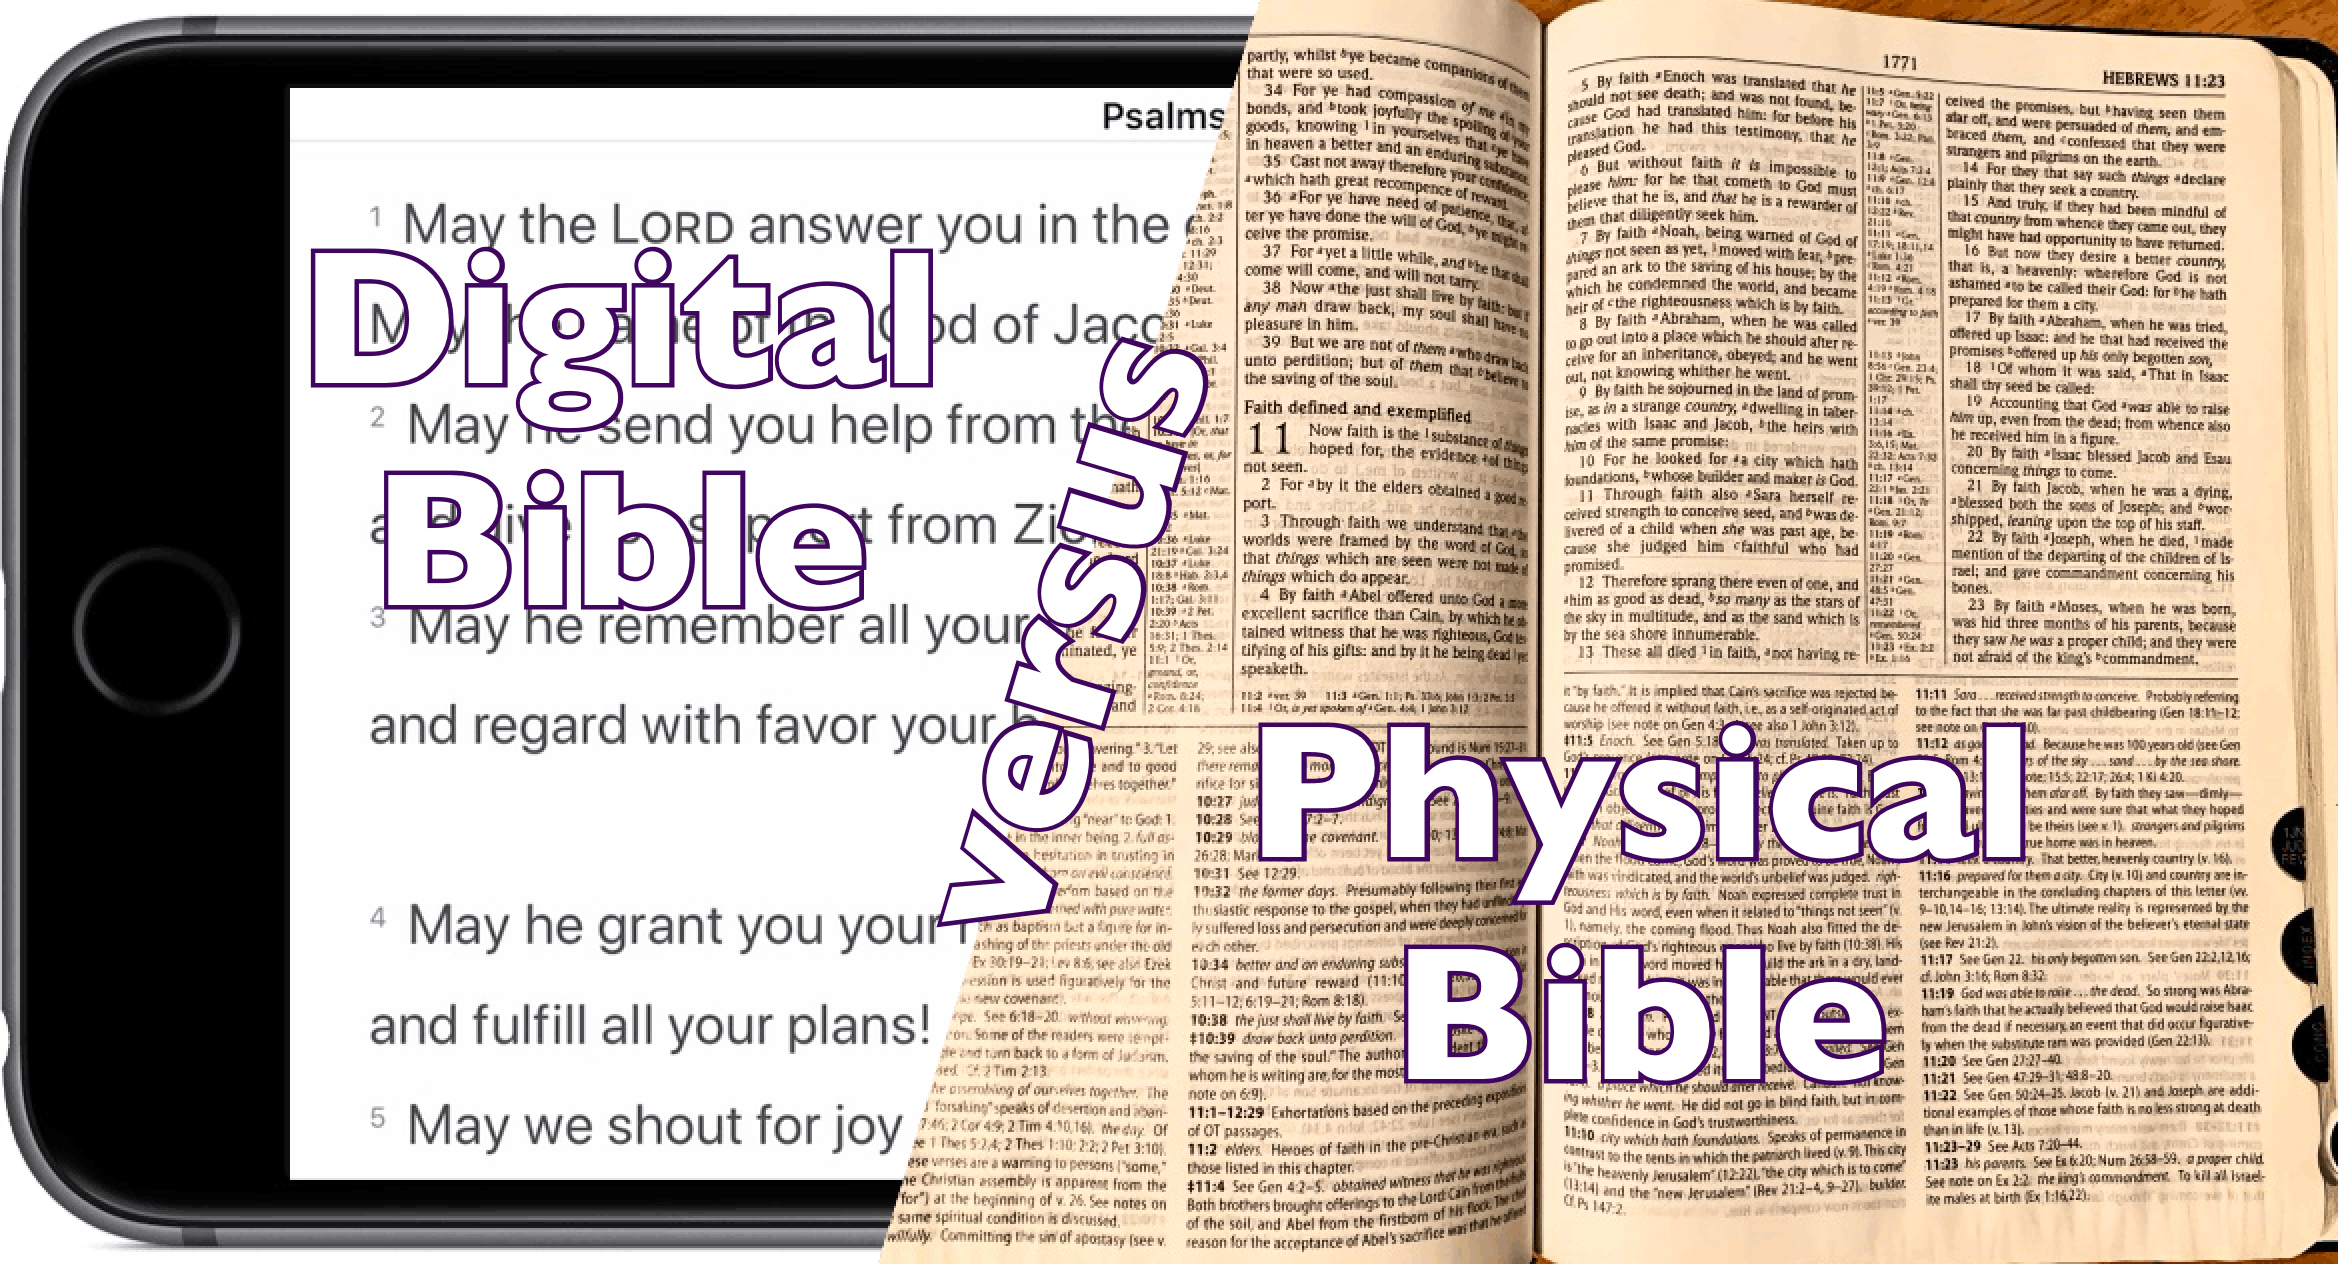 15 Reasons to Use a Digital Bible Instead of a Physical Bible